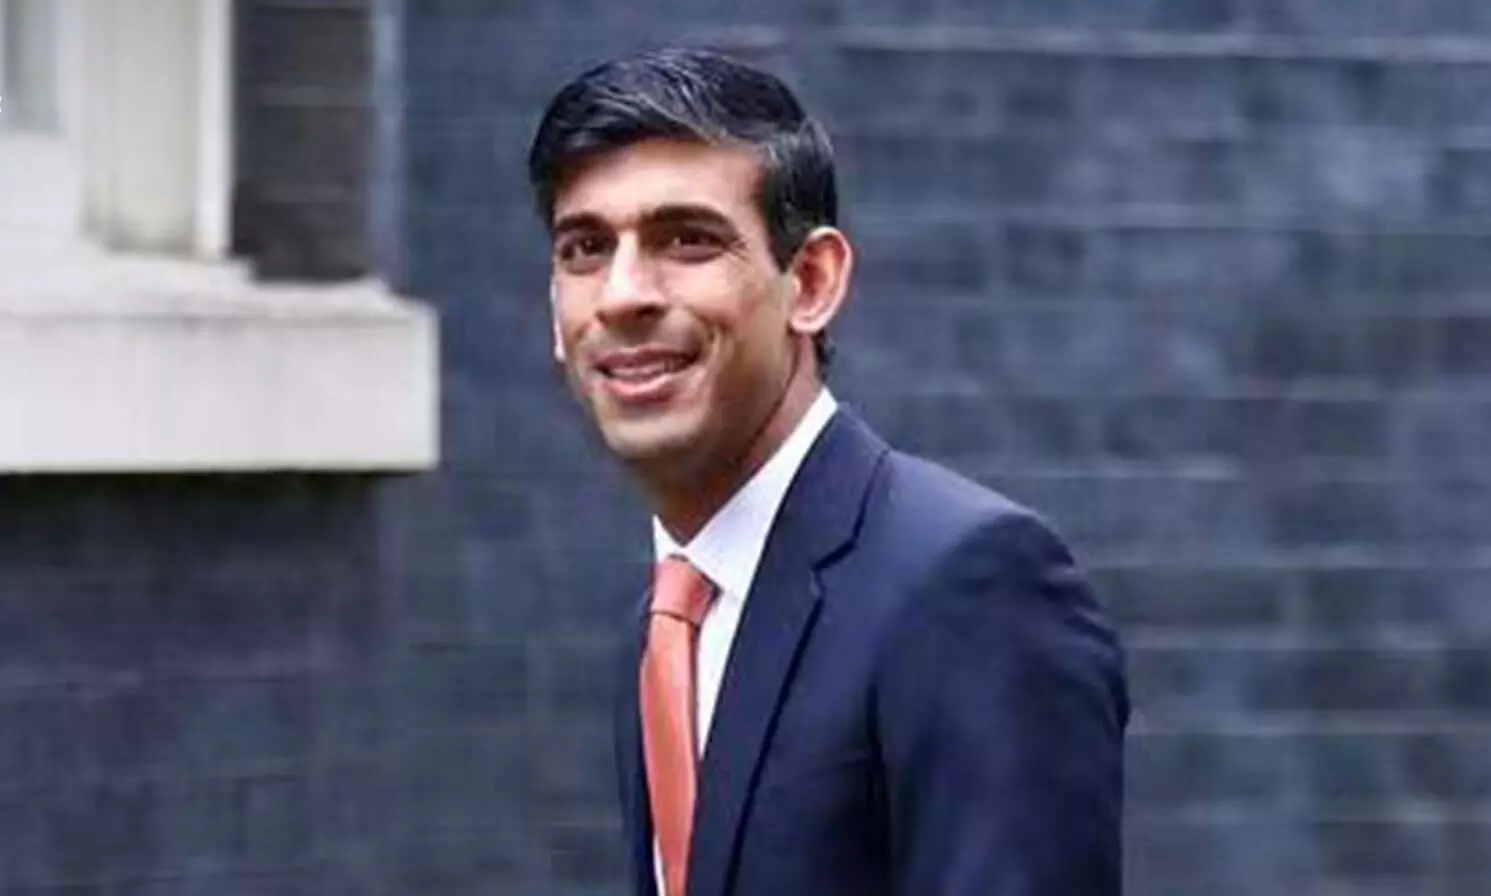 UK PM Rishi Sunak supports new oil and gas exploration amid environmental concerns